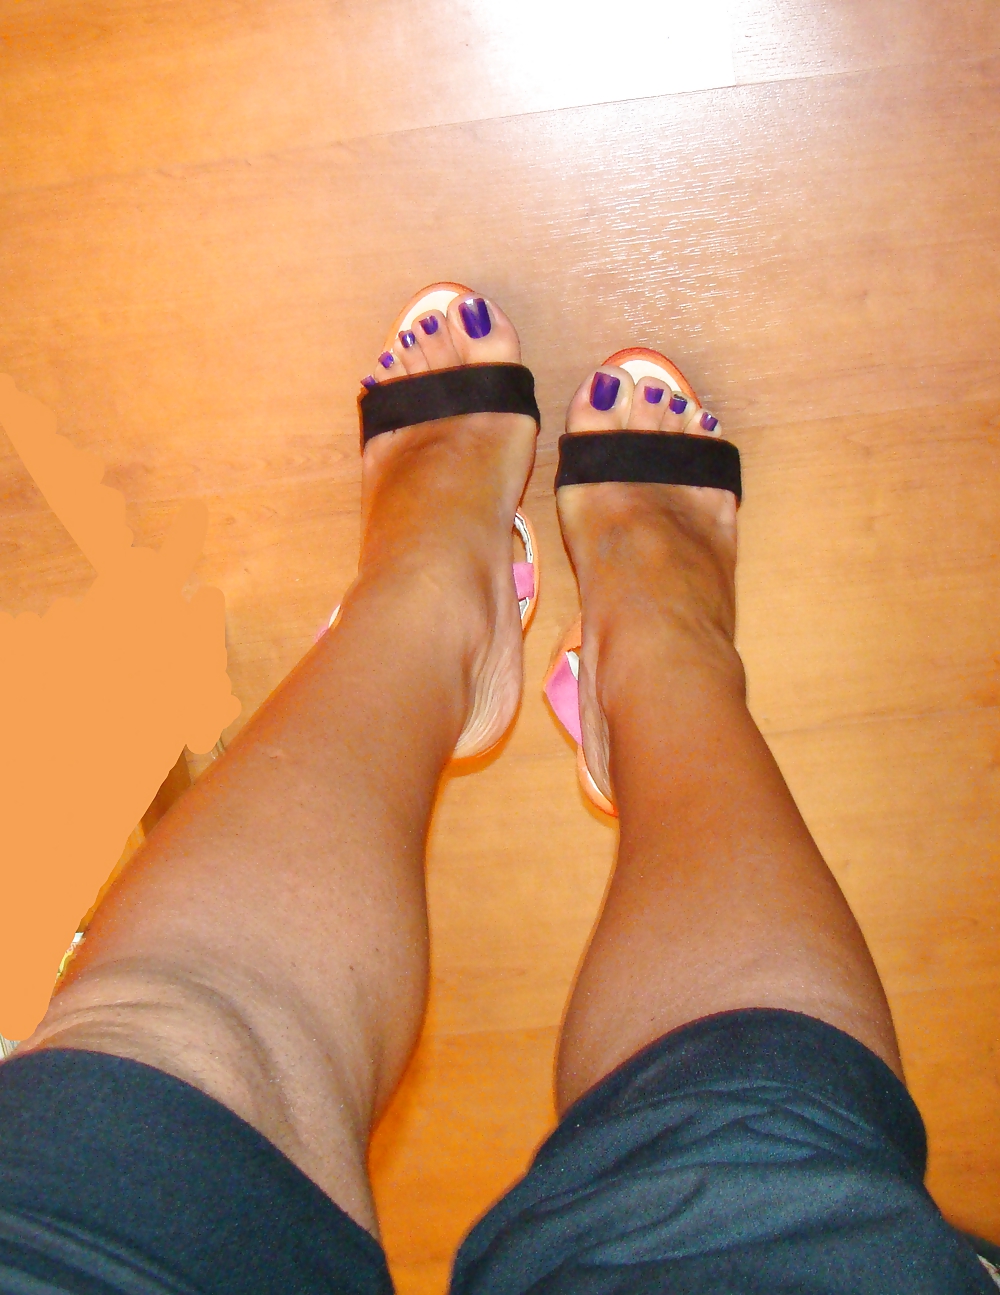 My new platforms and my nails painted #13161140